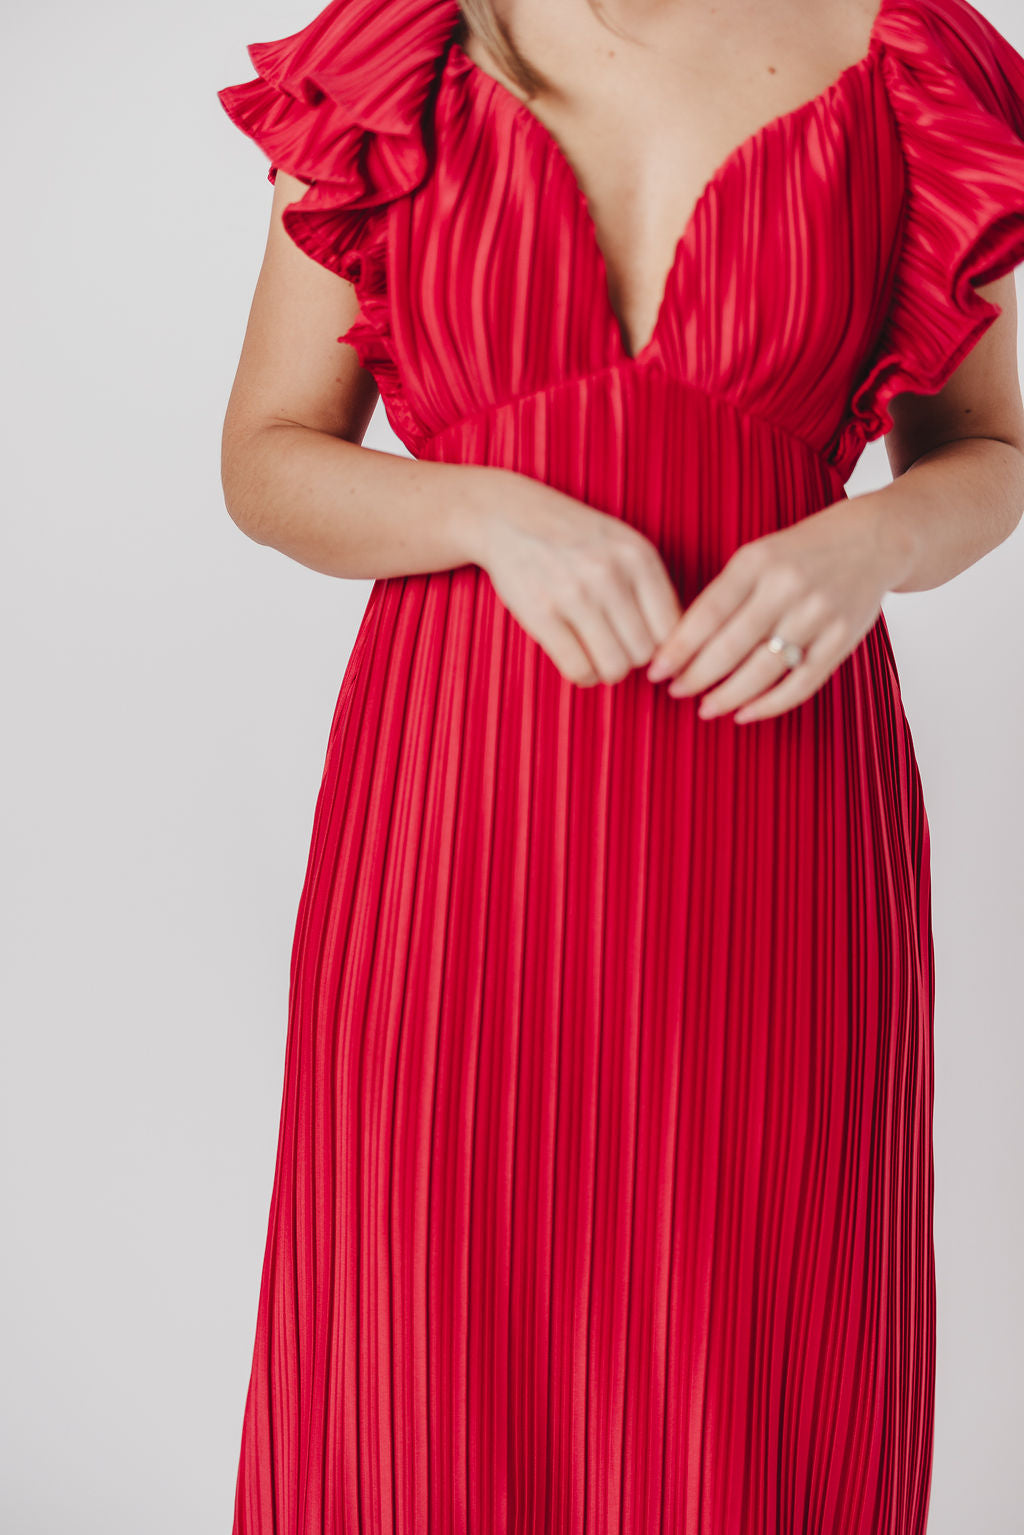 Lucky Charm Midi Dress in Red - Bump Friendly & Inclusive Sizing (S-3XL)